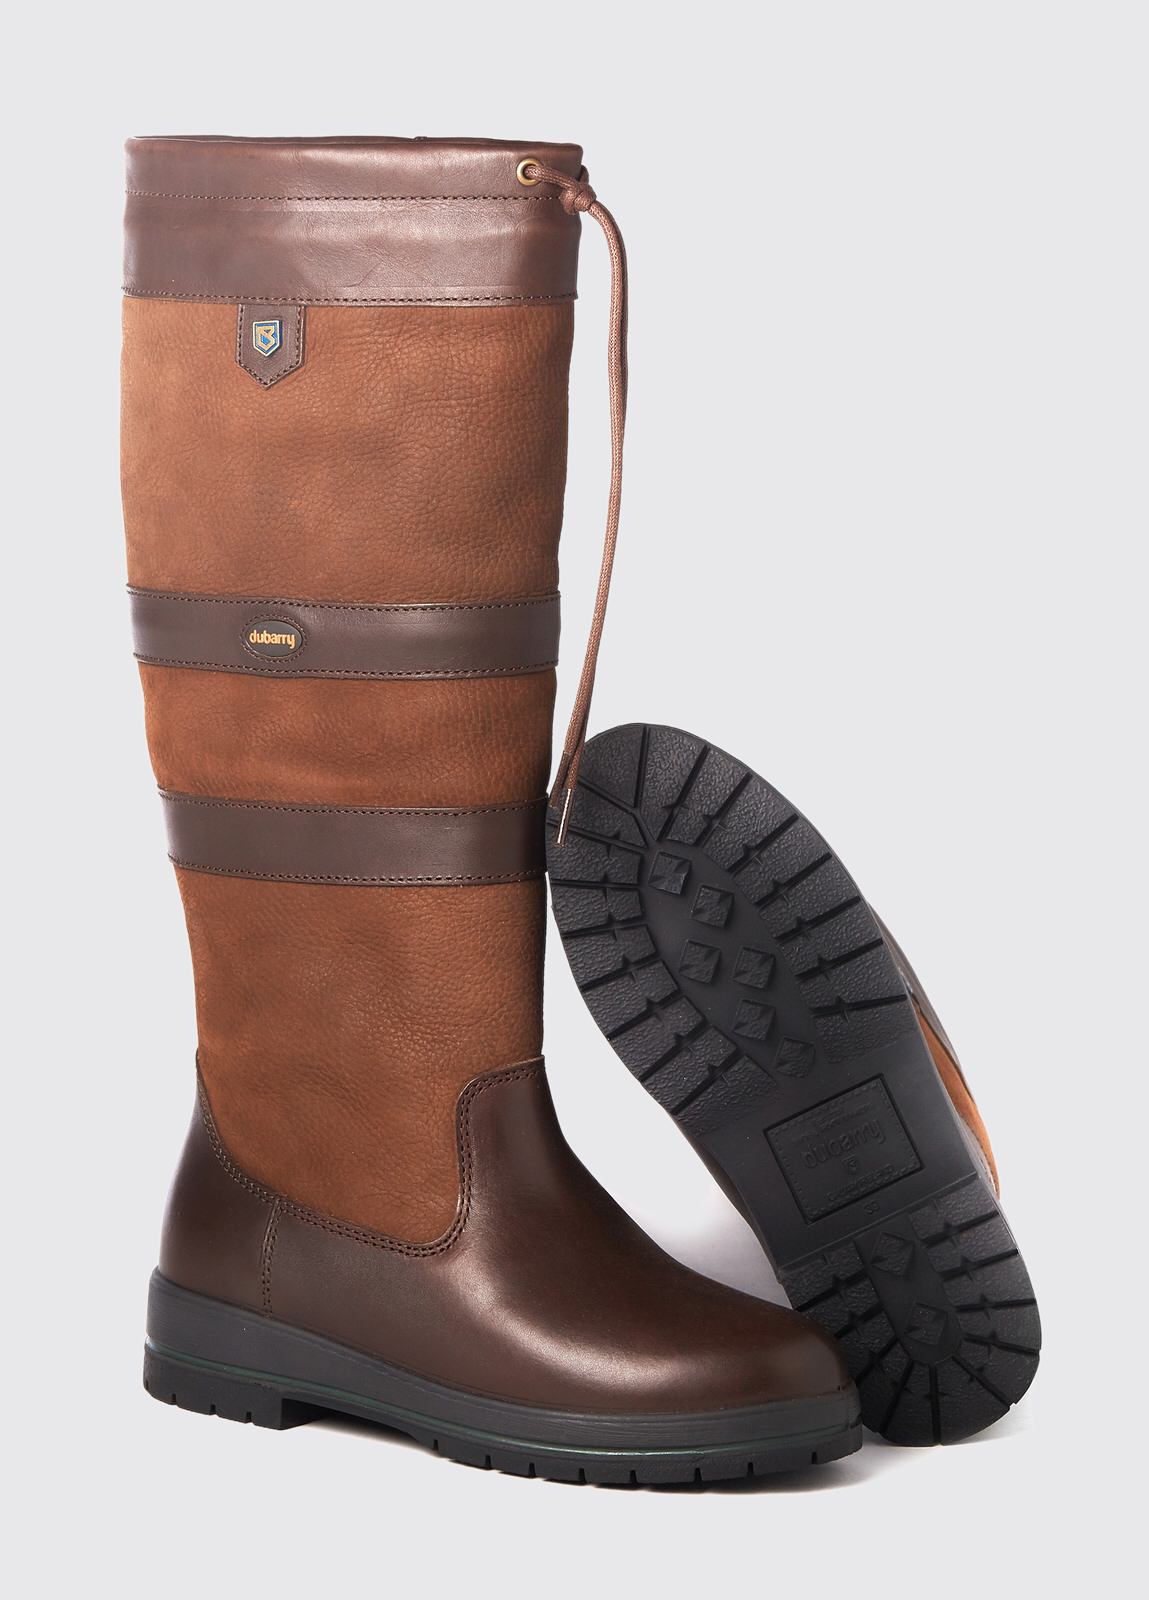 sadel støvle Tvunget Galway ExtraFit™ Country Boot | Dubarry of Ireland